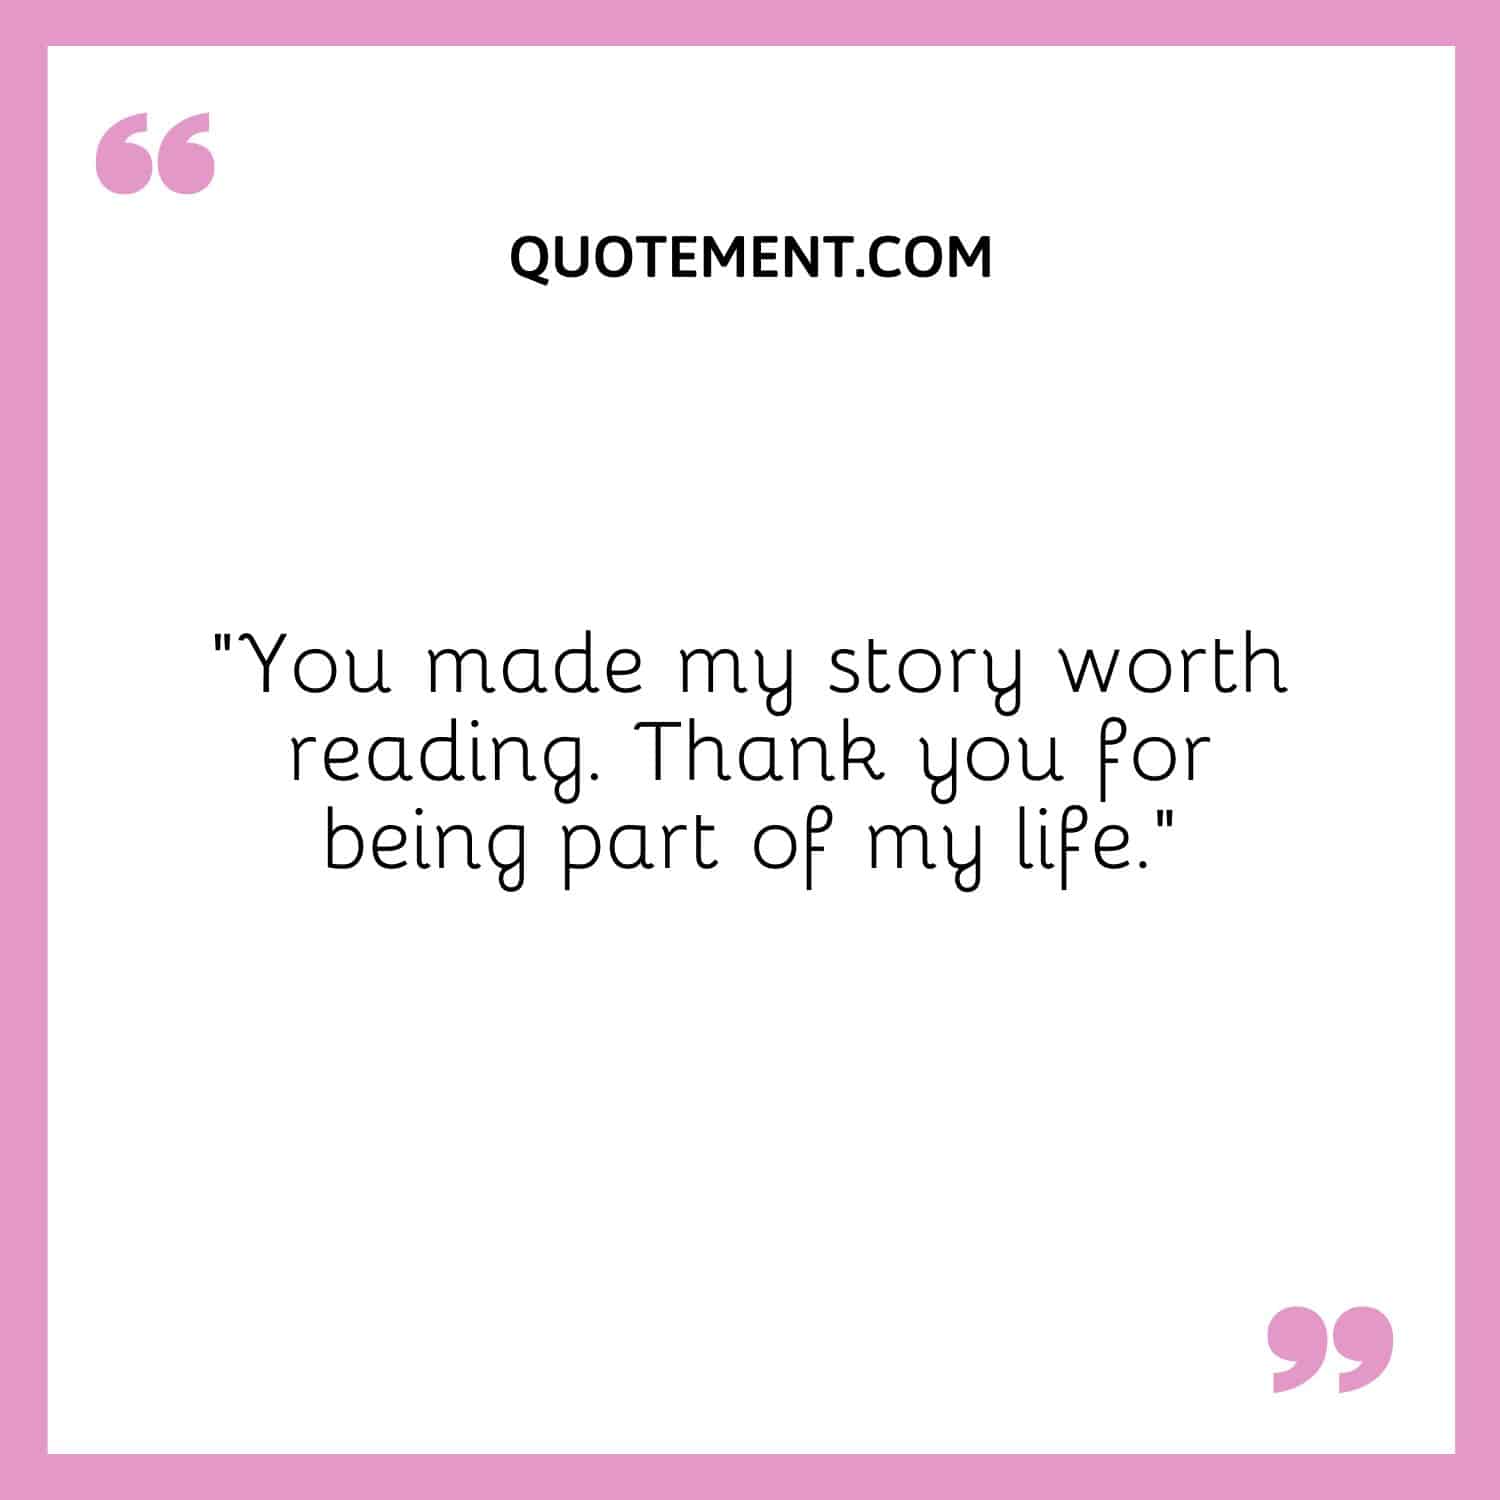 You made my story worth reading.